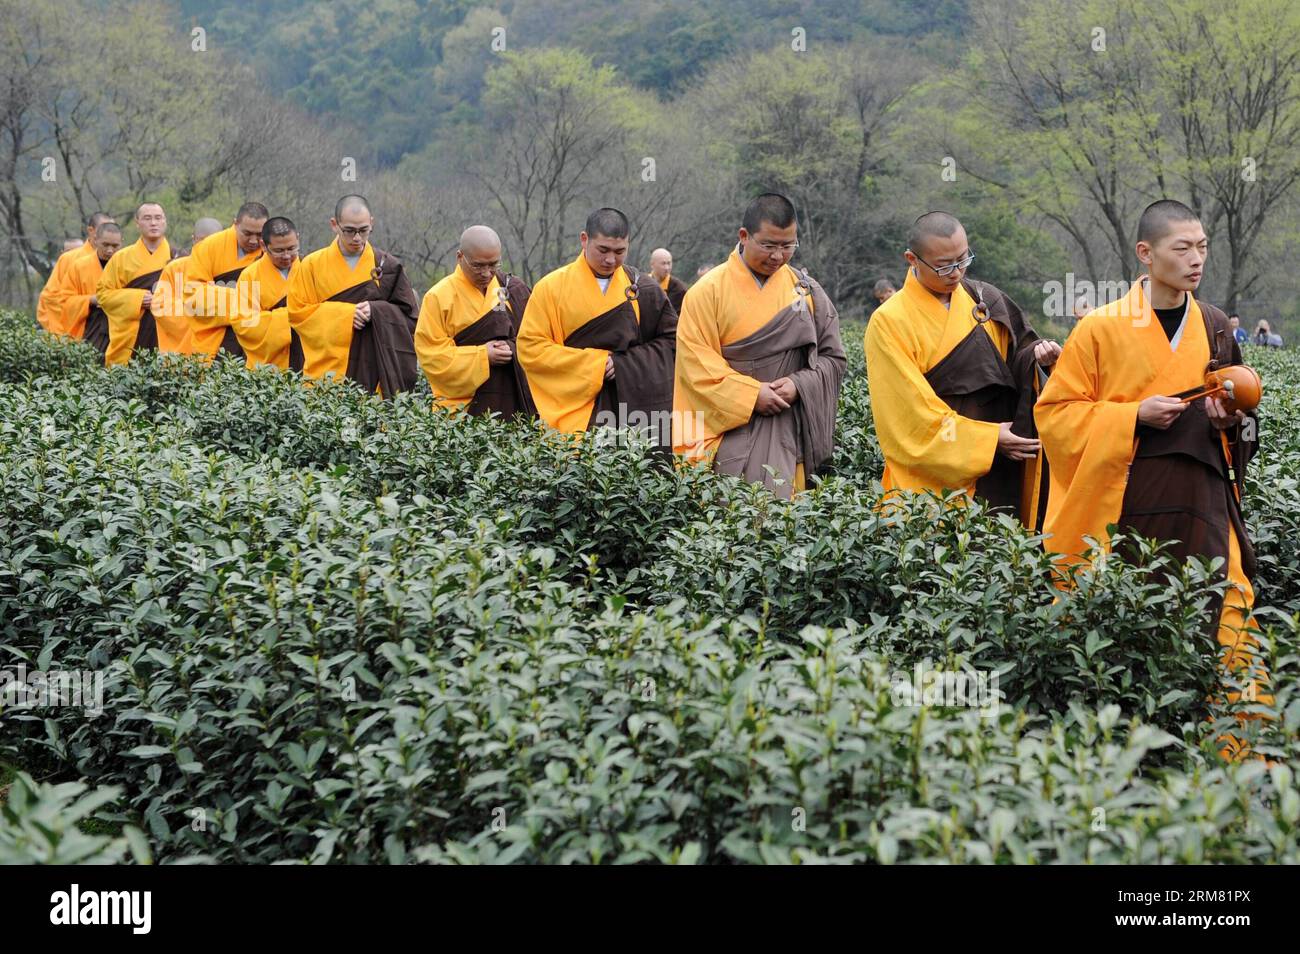 (140324) -- HANGZHOU, March 24, 2014 (Xinhua) -- Monks hold a cleaning ceremony before picking tea at a tea garden in Fajing Buddha Temple in Hangzhou, capital of east China s Zhejiang Province, March 24, 2014. More than 40 monks in the Fajing Temple began to pick Fajing zen tea belonged to the temple Monday. The Fajing zen tea, produced within the origin area of West Lake Dragon Well(Longjing) Tea, is planted, picked and drinked by monks themselves in the temple. Zen tea is a special tea culture for Buddhists to be enlightened with Buddha dharma through tea making and drinking. (Xinhua/Ju Hua Stock Photo